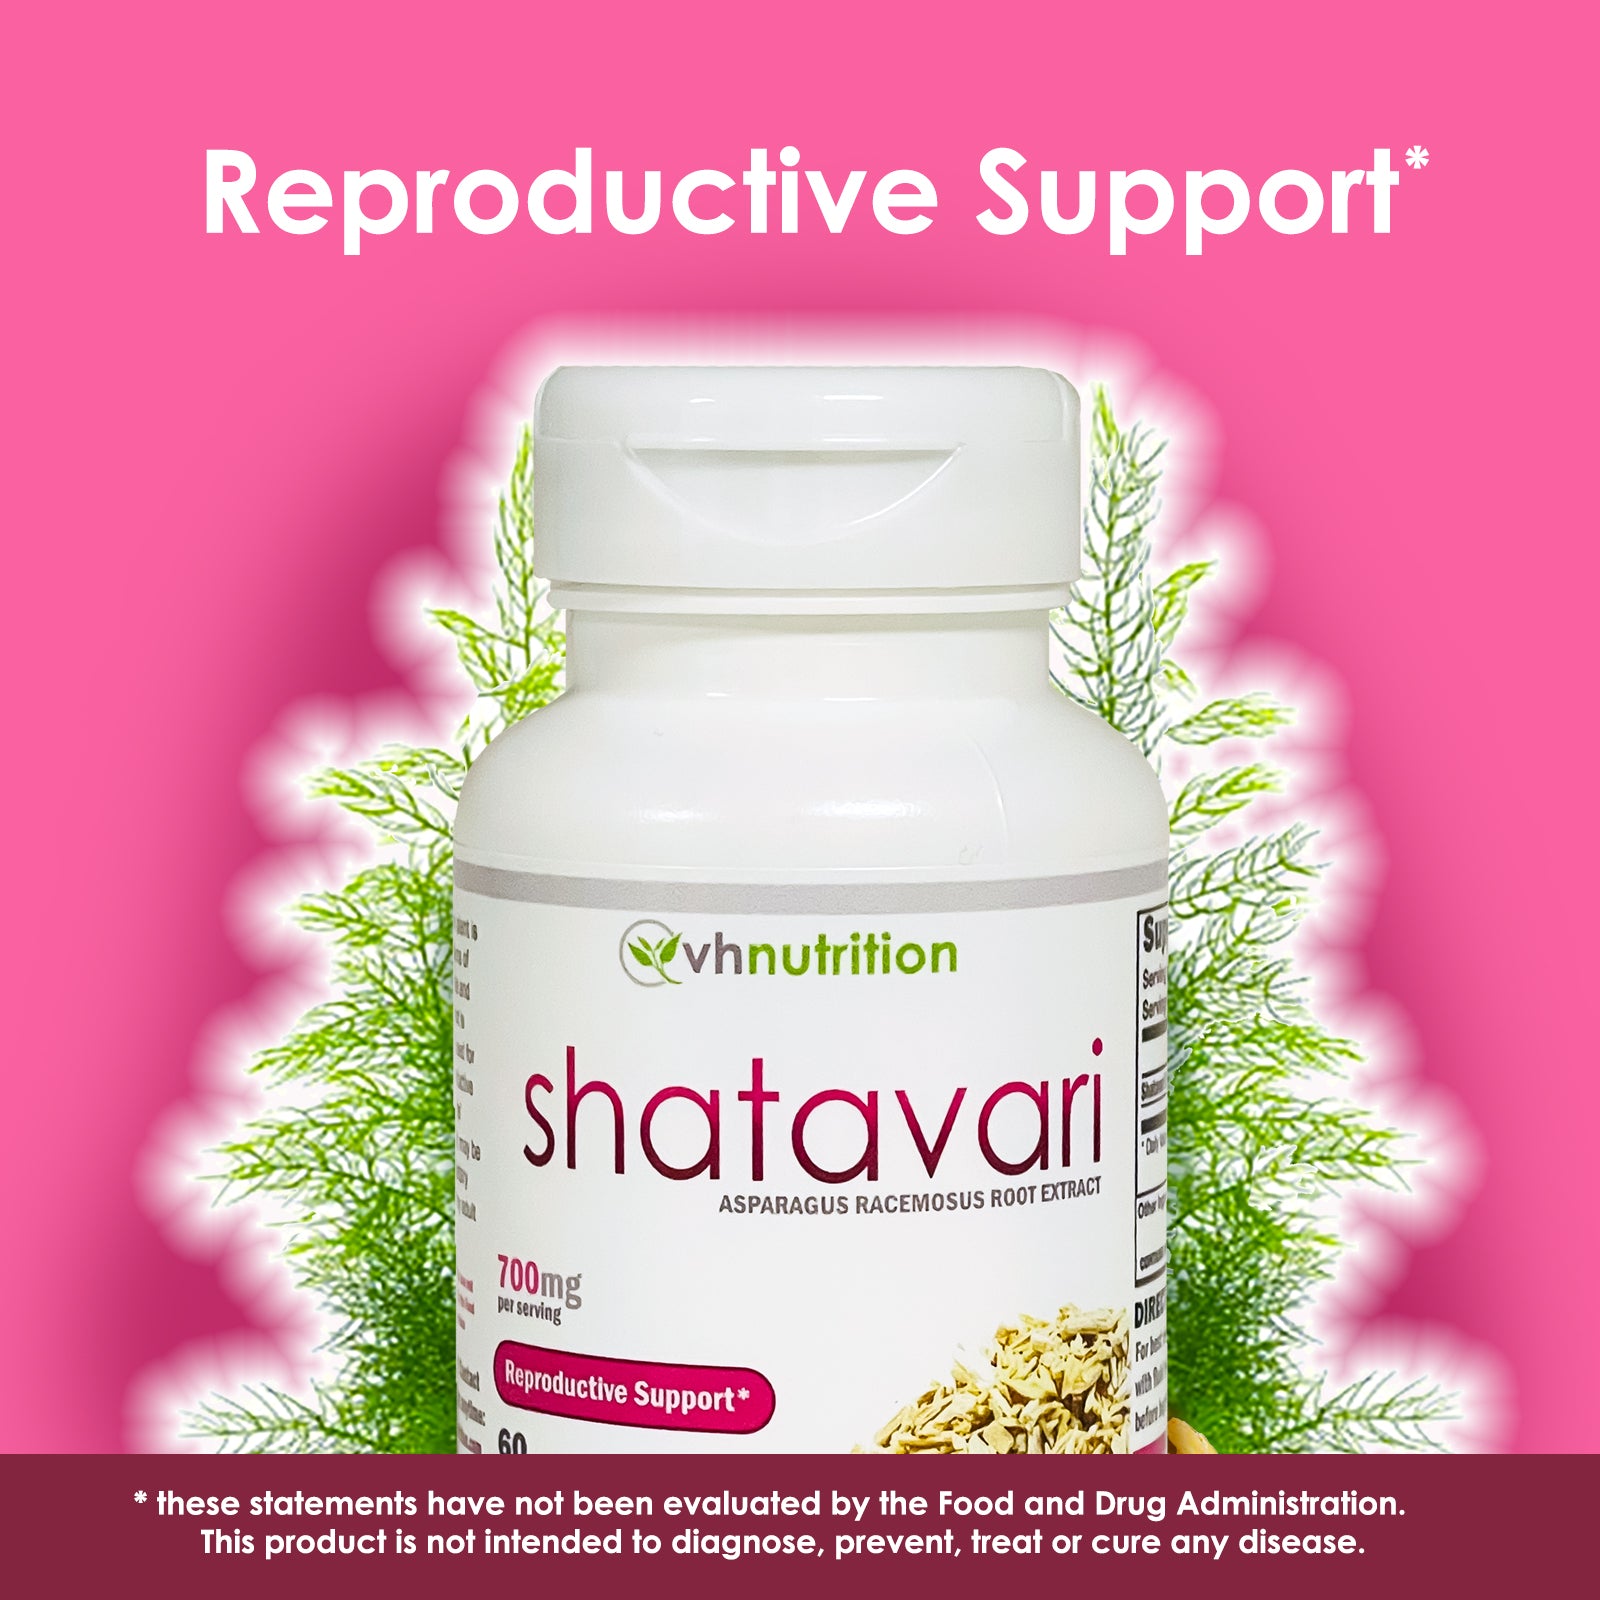 VH Nutrition SHATAVARI | Extra Strength Reproductive Support for Women* | 700mg Per Serving | Standardized Asparagus racemosus Extract Powder | 60 Capsules